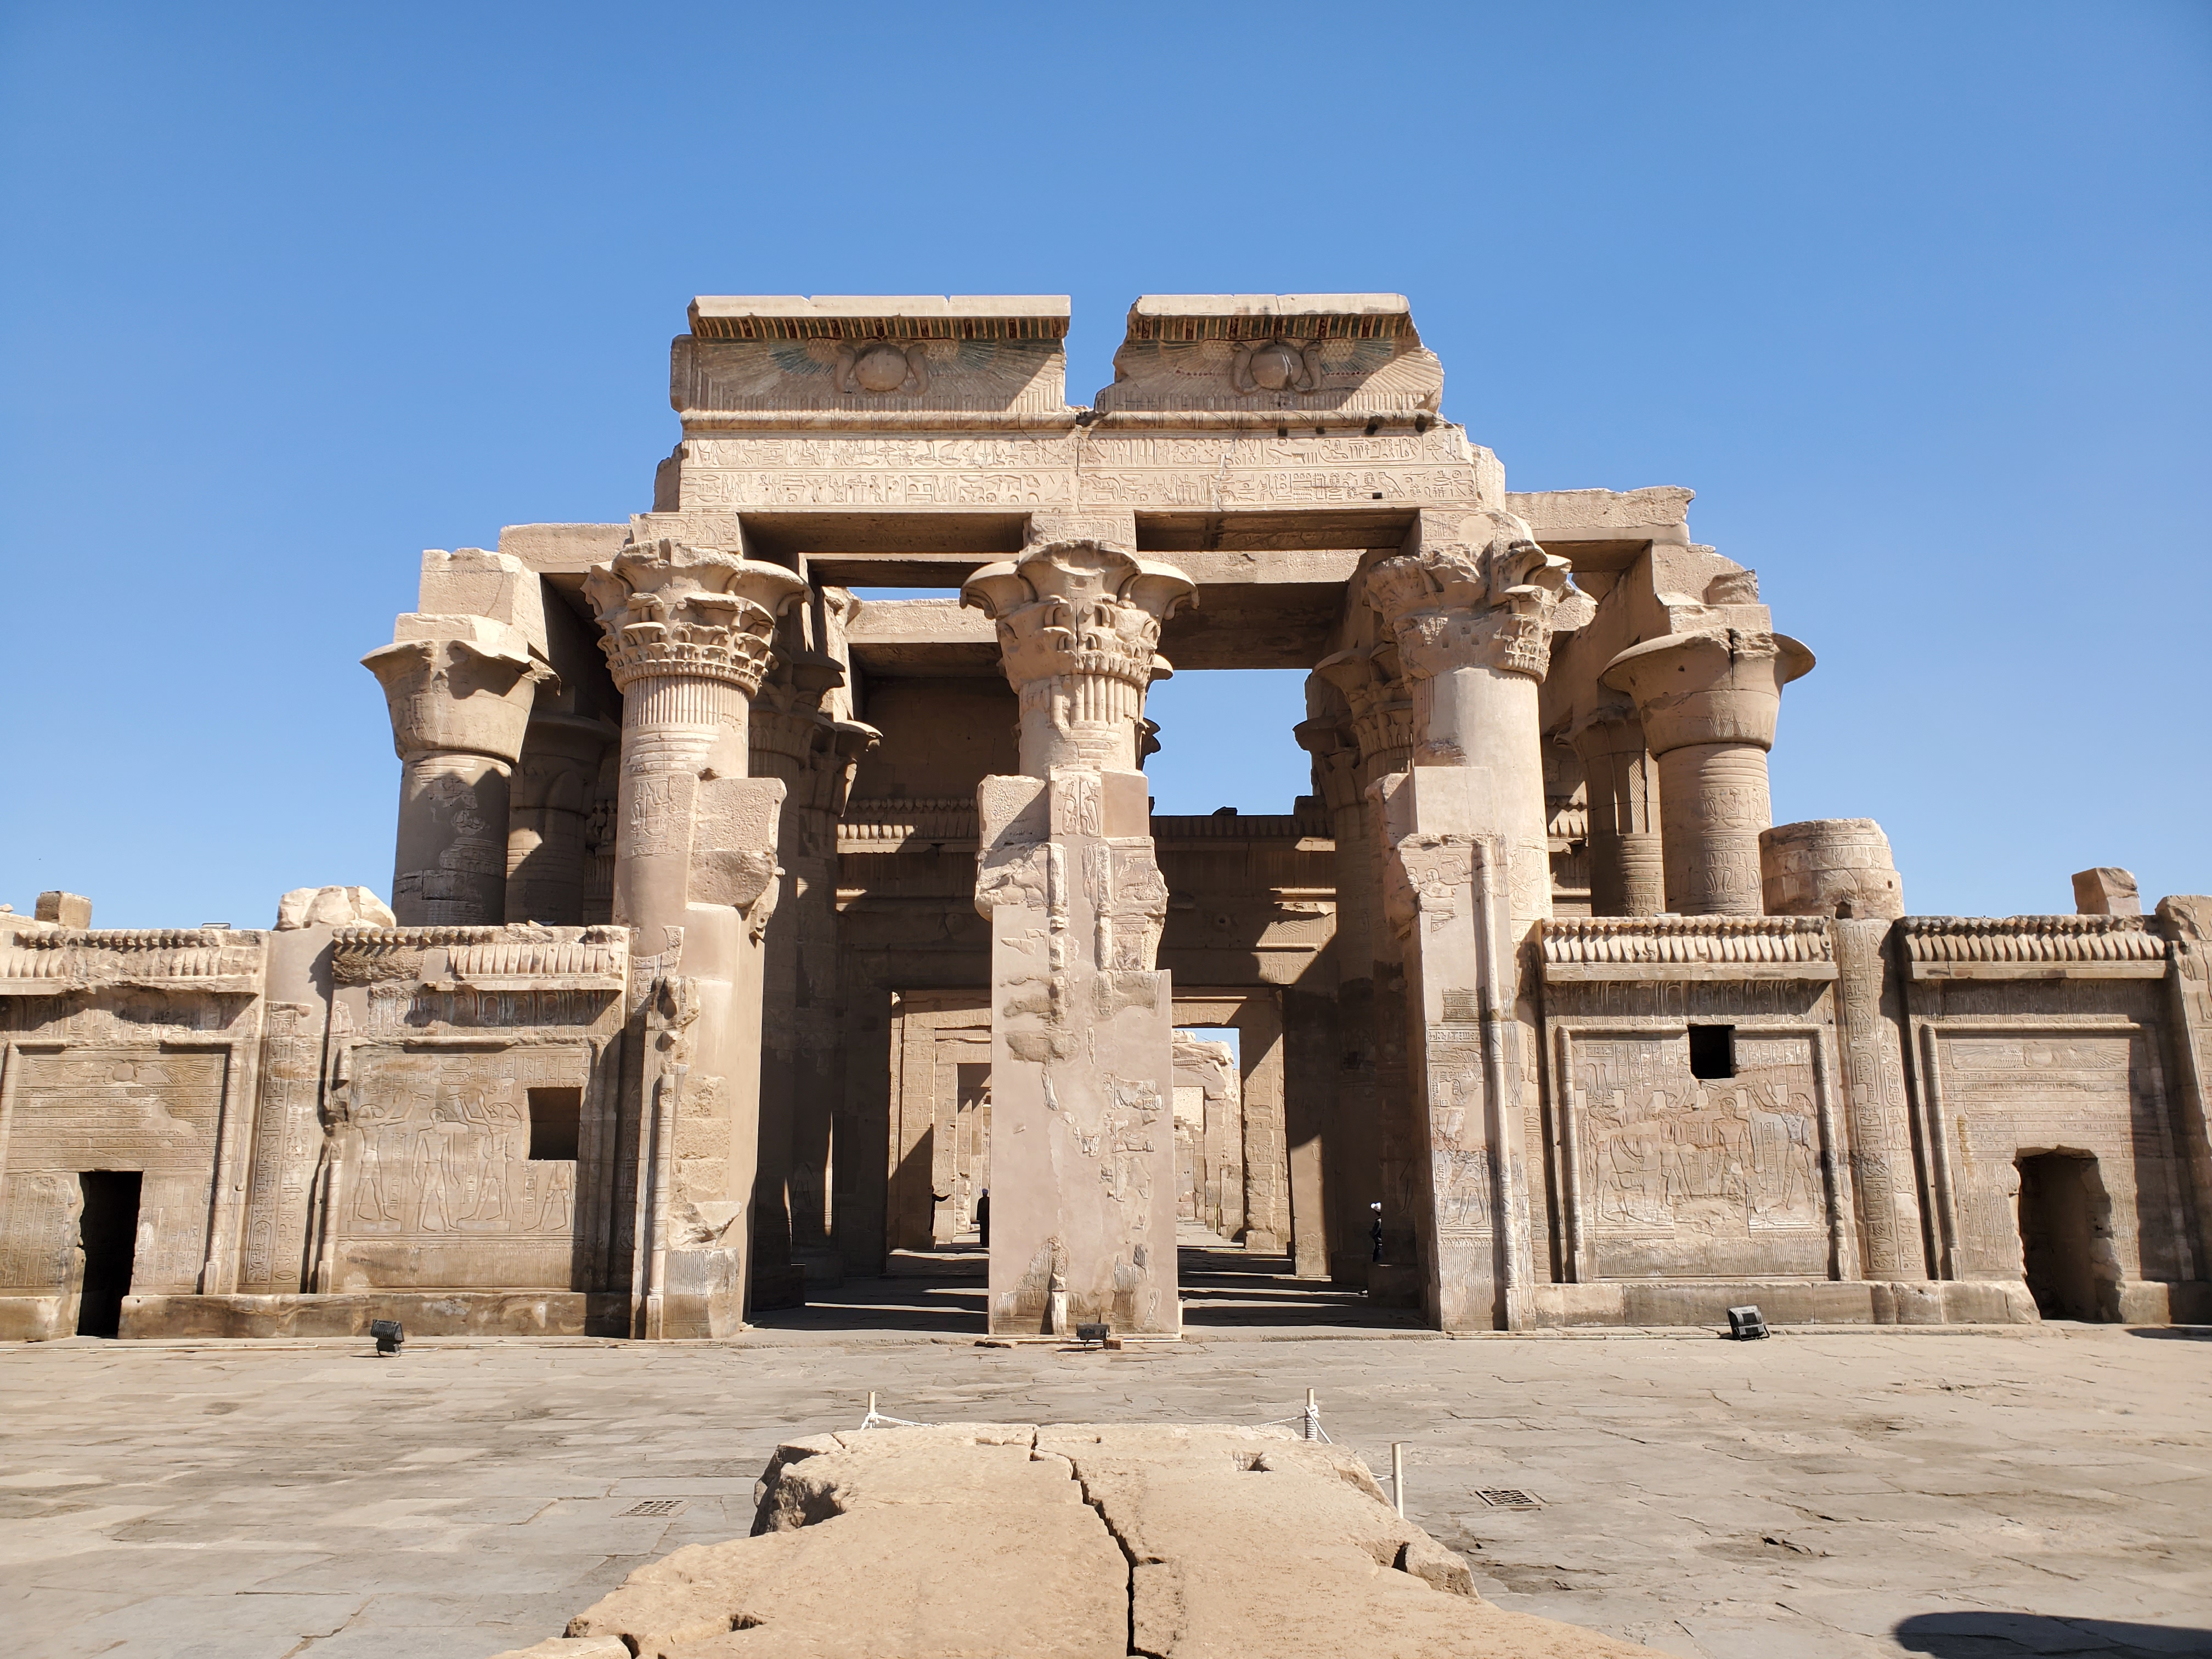 A view of the magnificent Kom Ombo Temple, Egypt